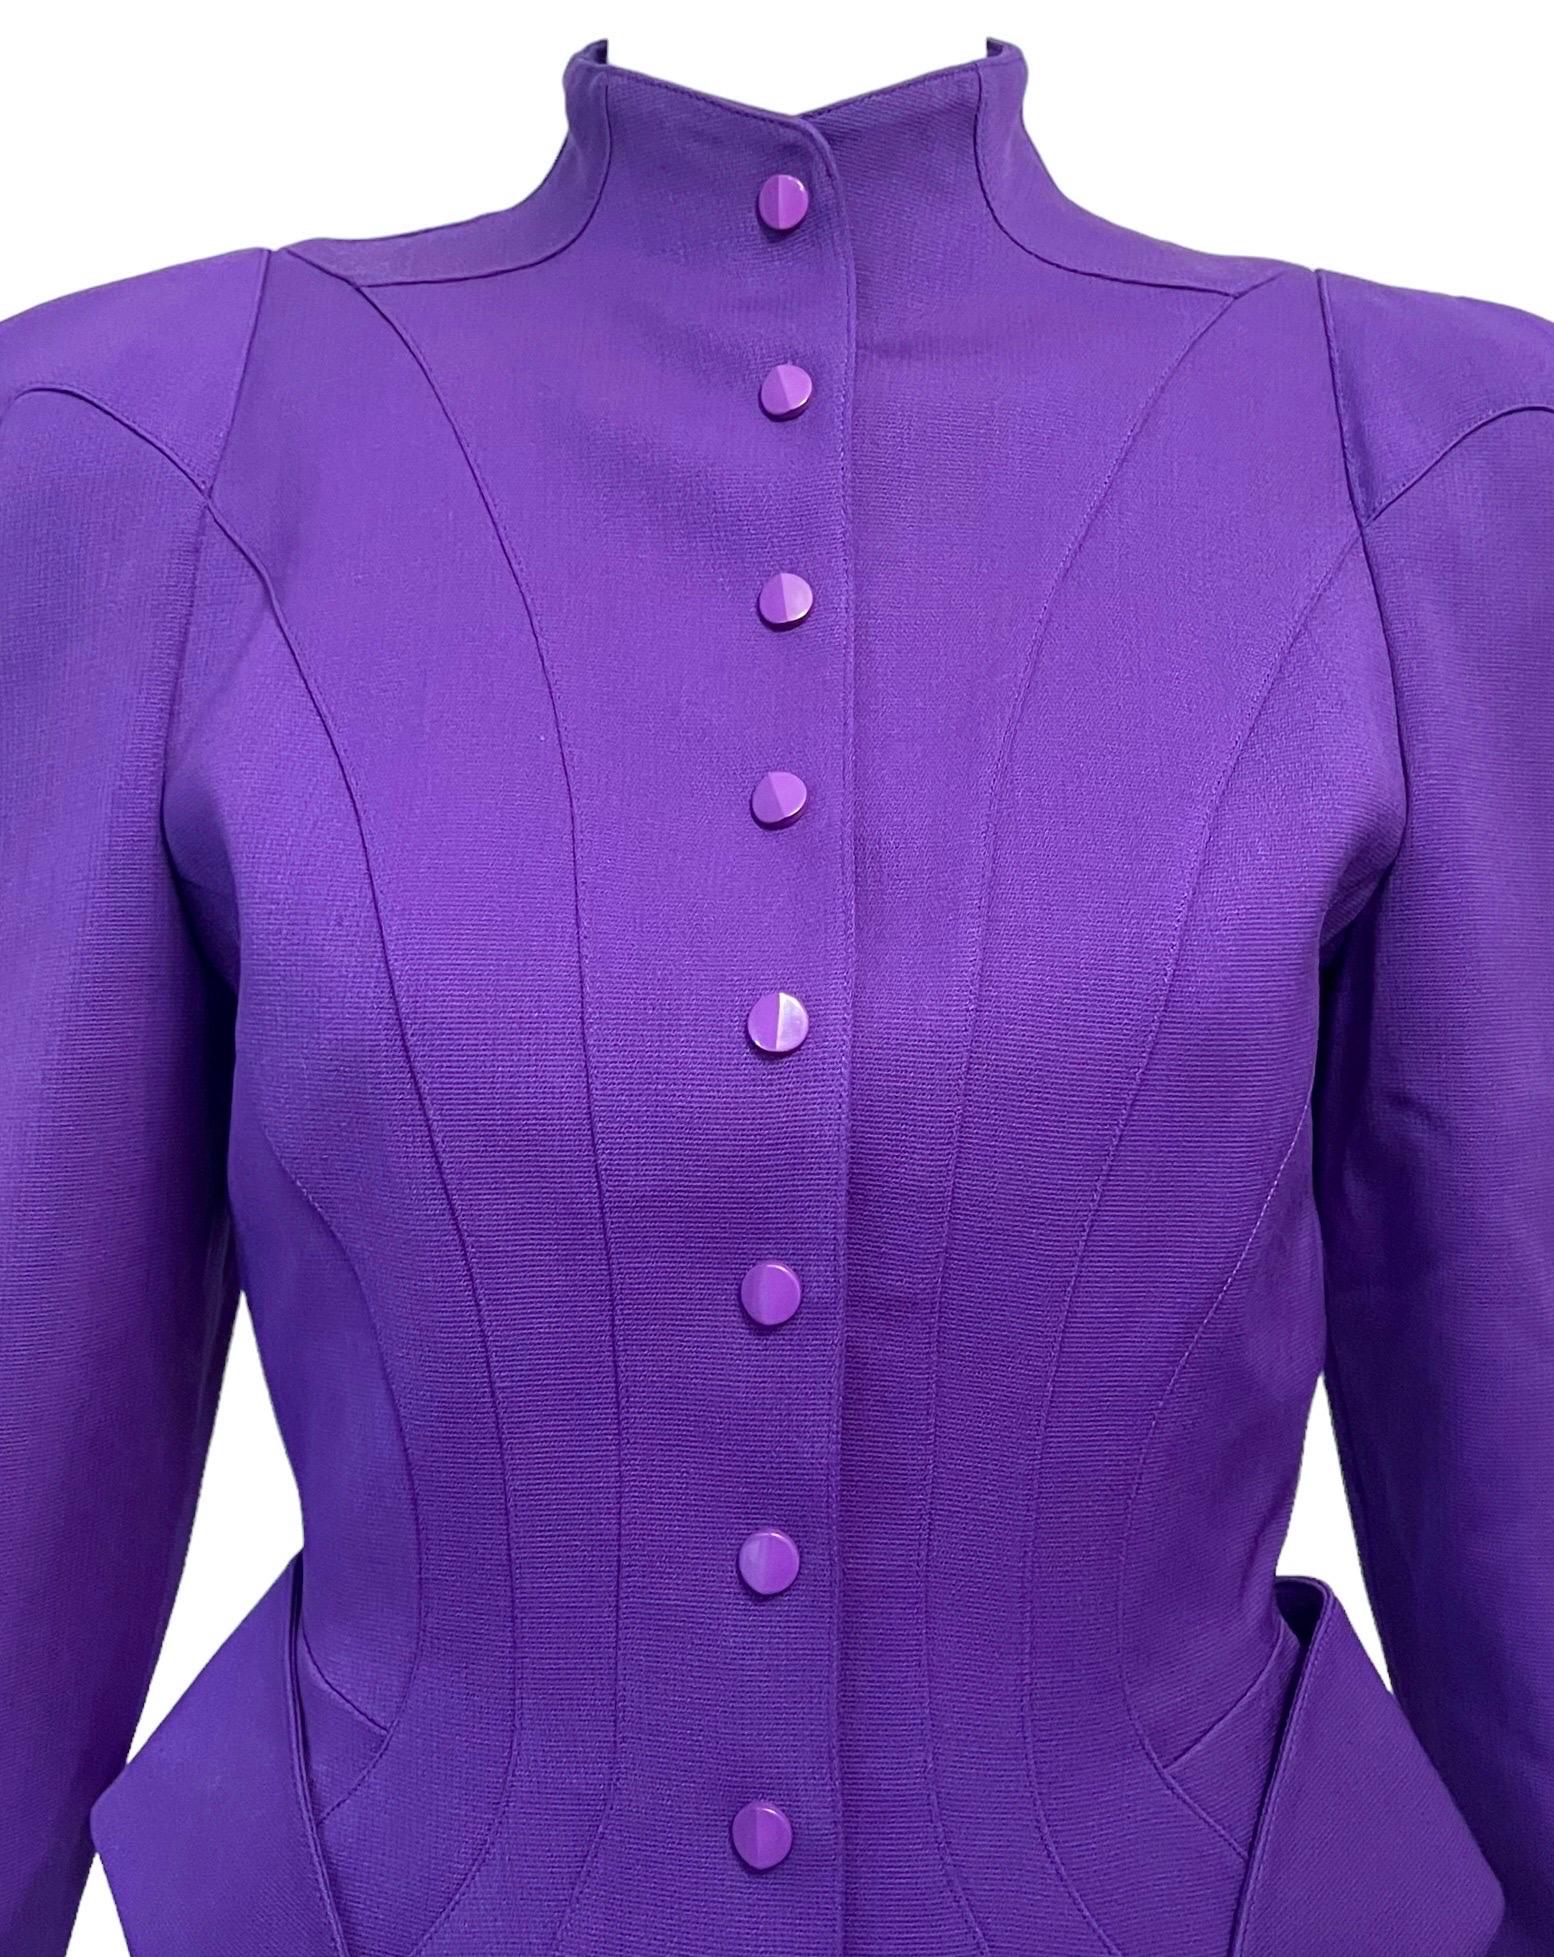 F/W 1988 Thierry Mugler Purple Futuristic Les Infernales Sculptural Jacket For Sale 2